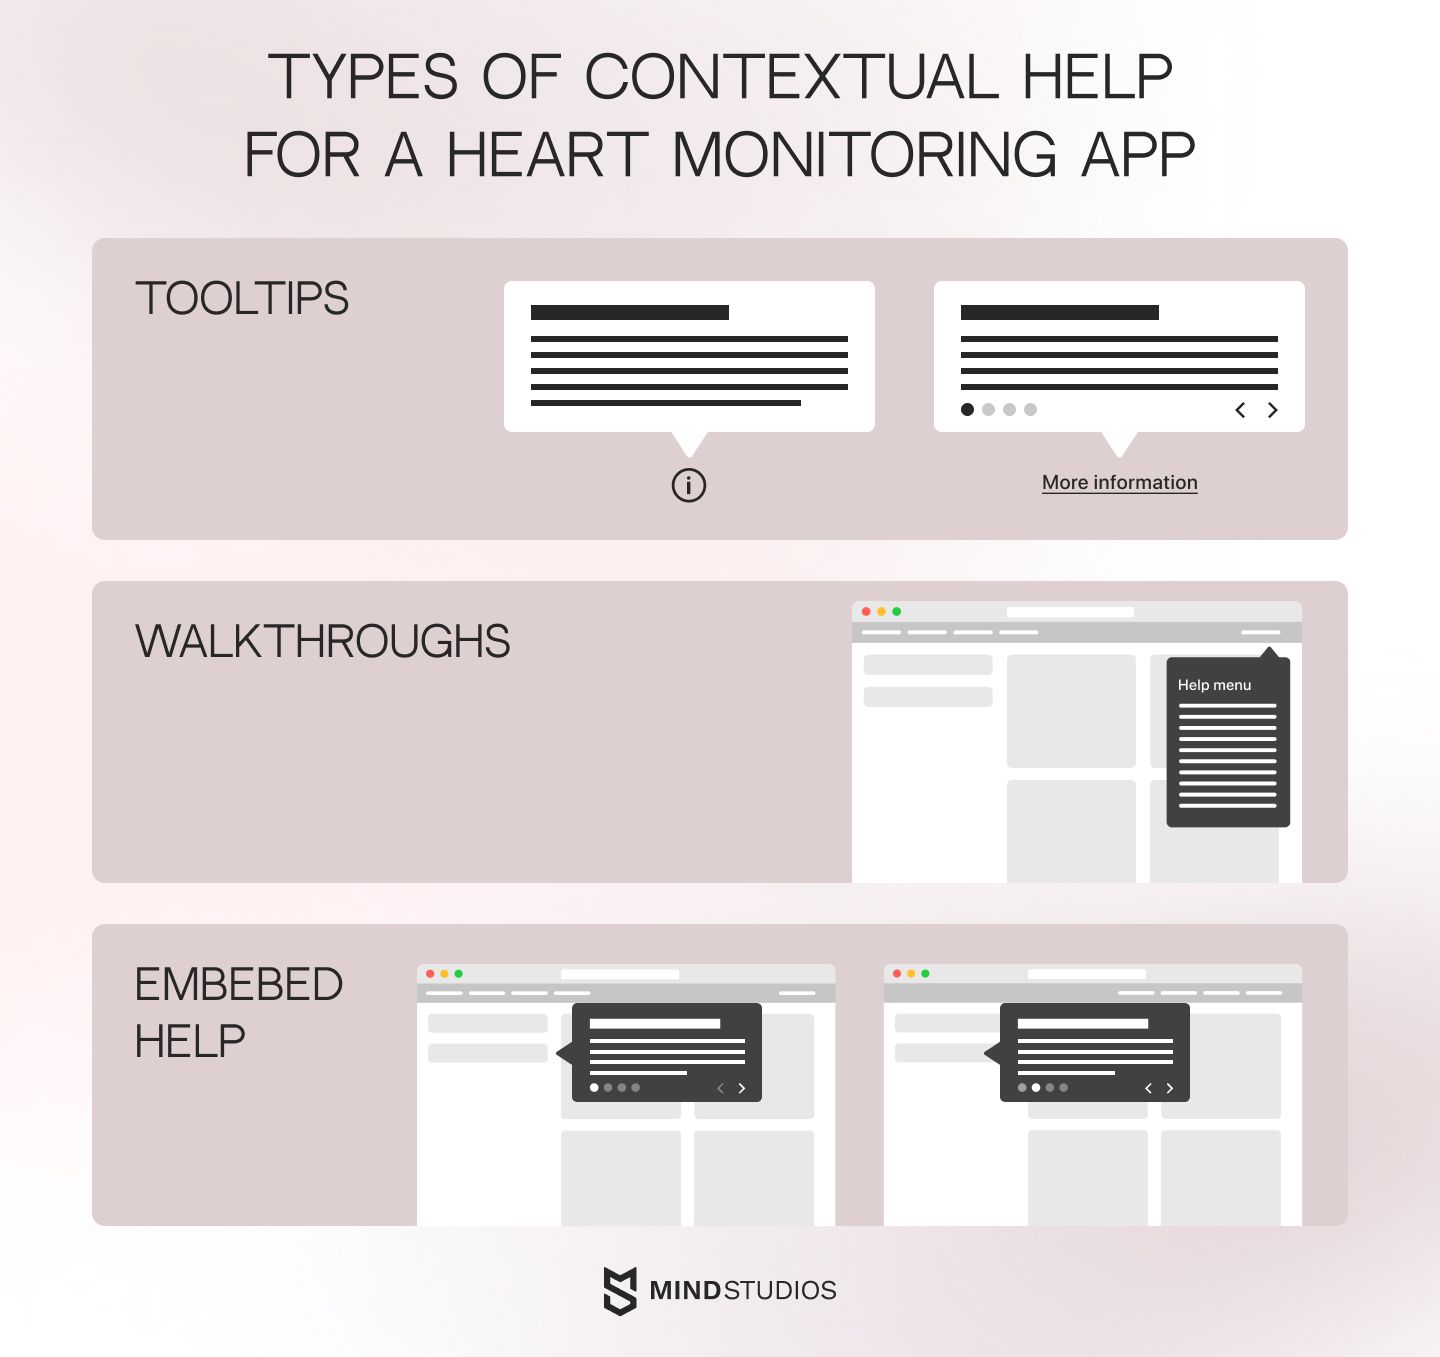 Types of contextual help for a heart monitoring app